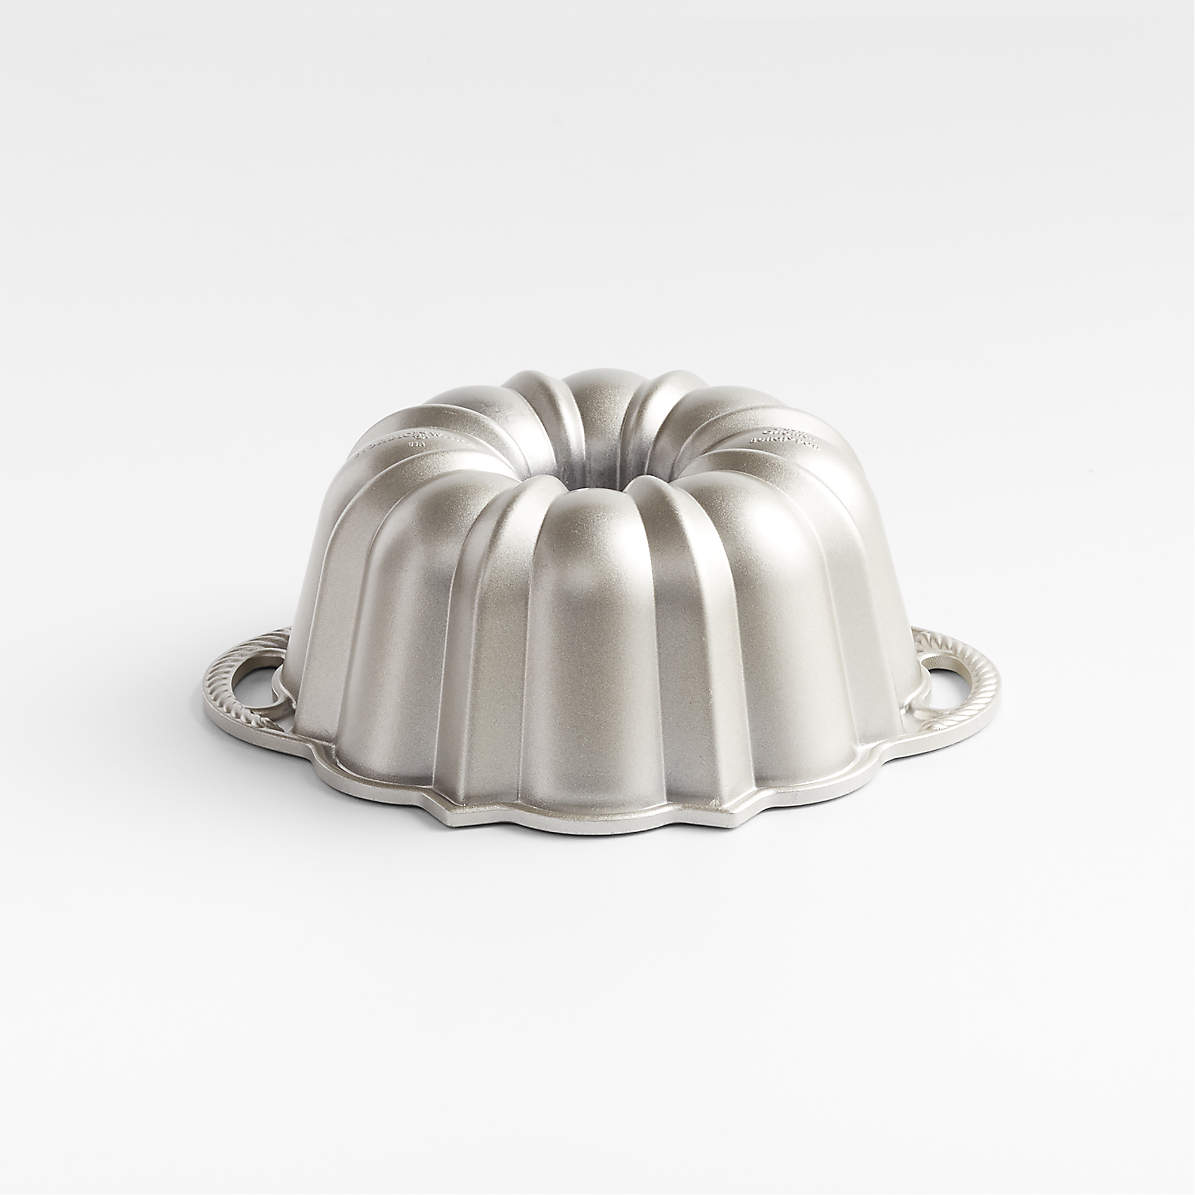 https://cb.scene7.com/is/image/Crate/NordicWare6cAnnvBndtPanSSF22/$web_pdp_main_carousel_zoom_med$/220524121039/nordic-ware-silver-6-cup-anniversary-bundt-pan.jpg